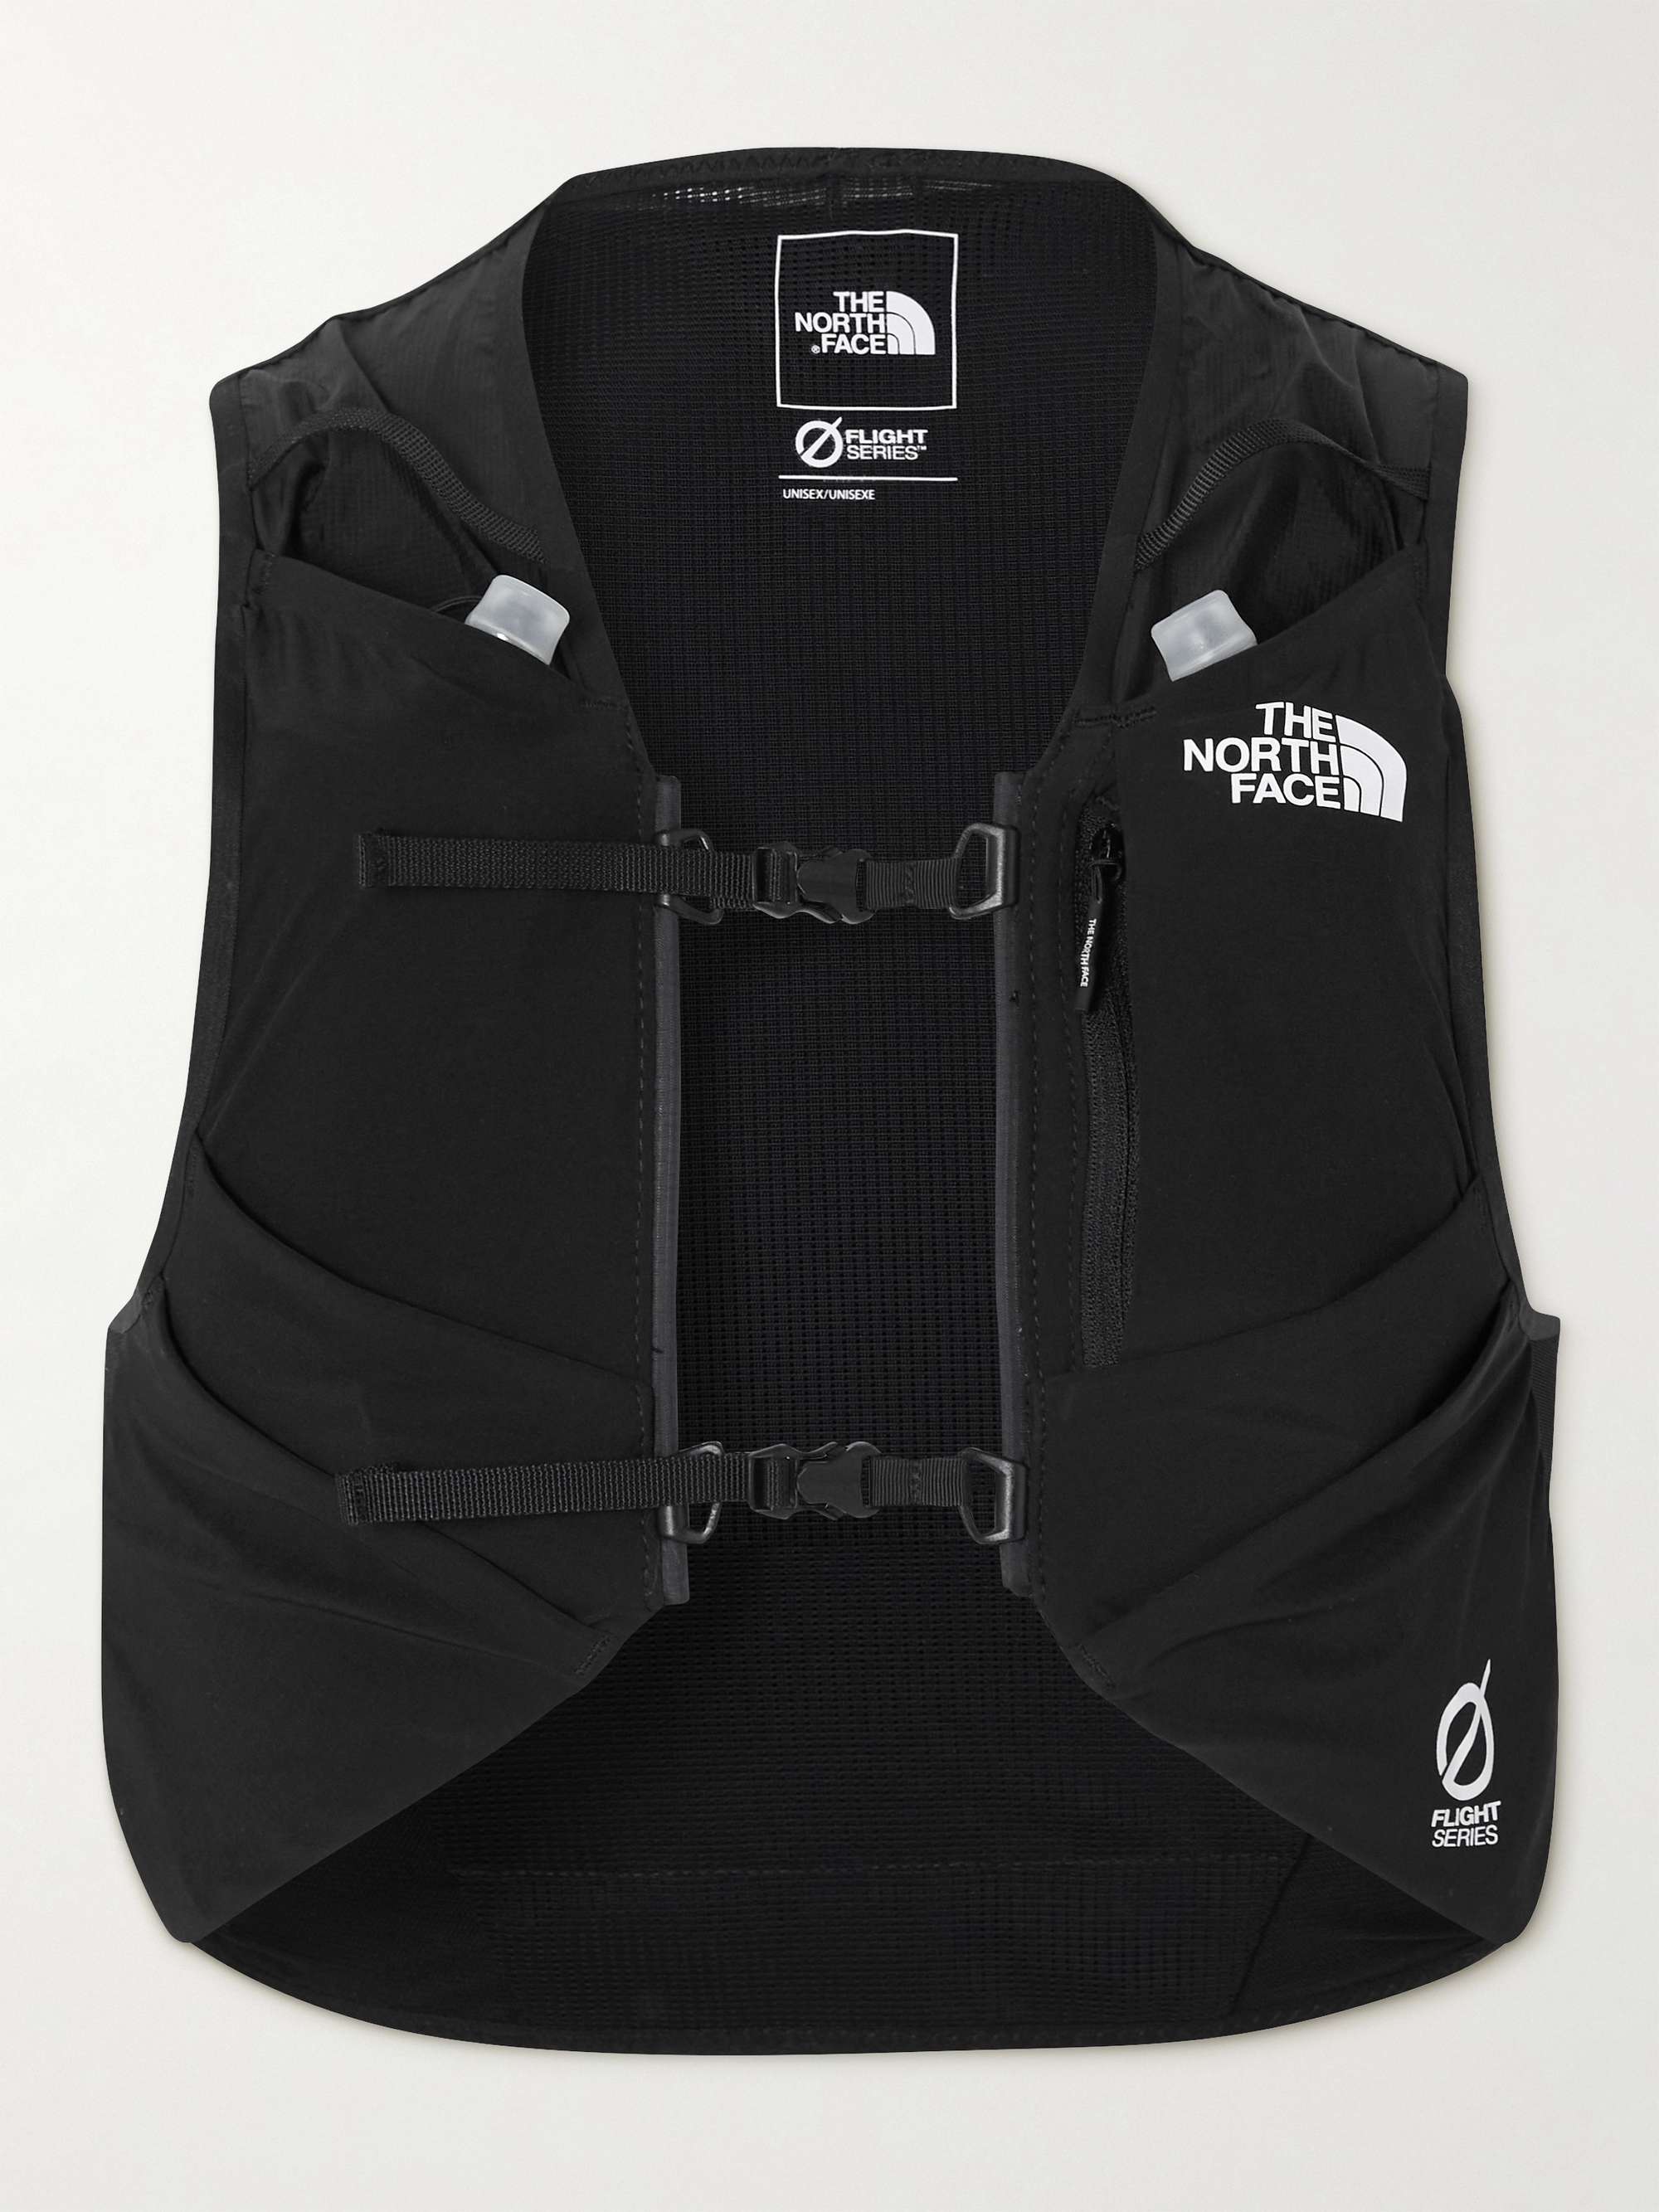 THE NORTH FACE Flight Race Day Mesh Gilet